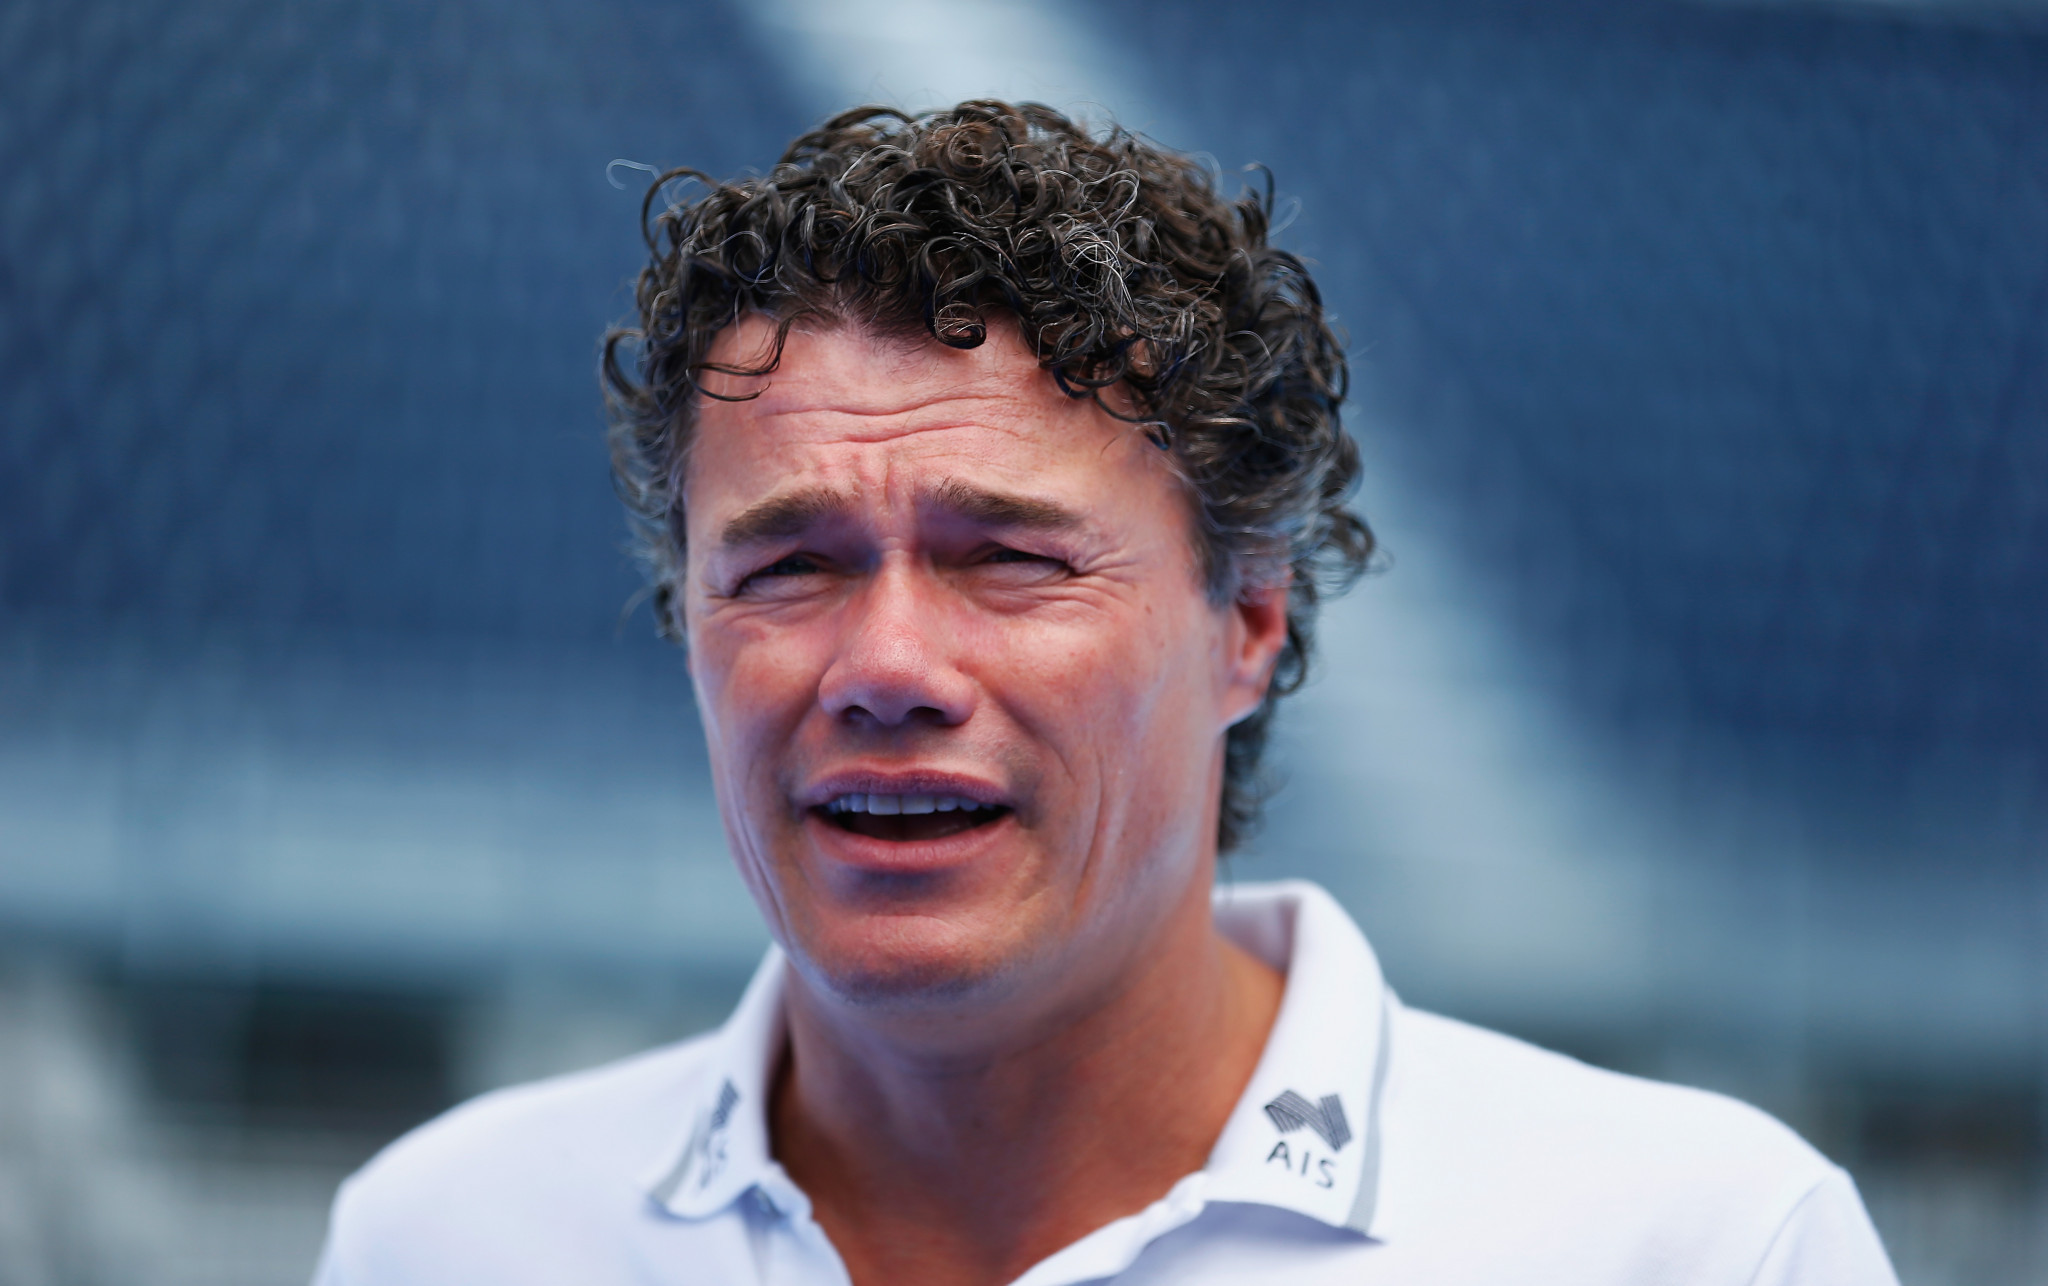 Verhaeren appointed French Swimming Federation performance director ahead of Paris 2024